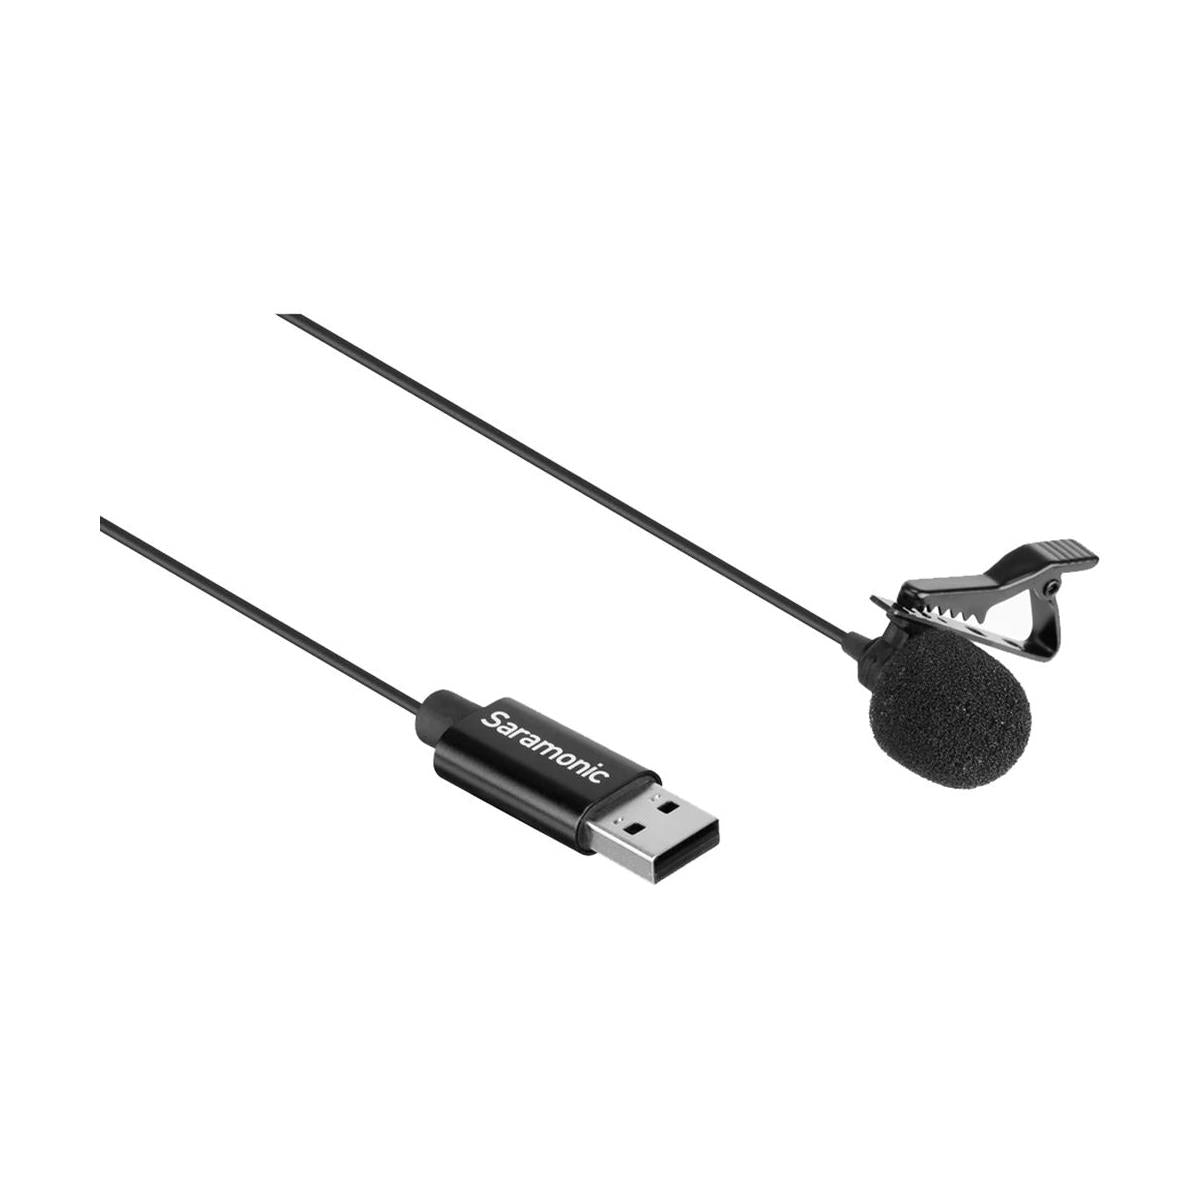 Saramonic SR-ULM10 Clip-on Omnidirectional USB Lavalier Microphone for PC Computers (2M Cable)